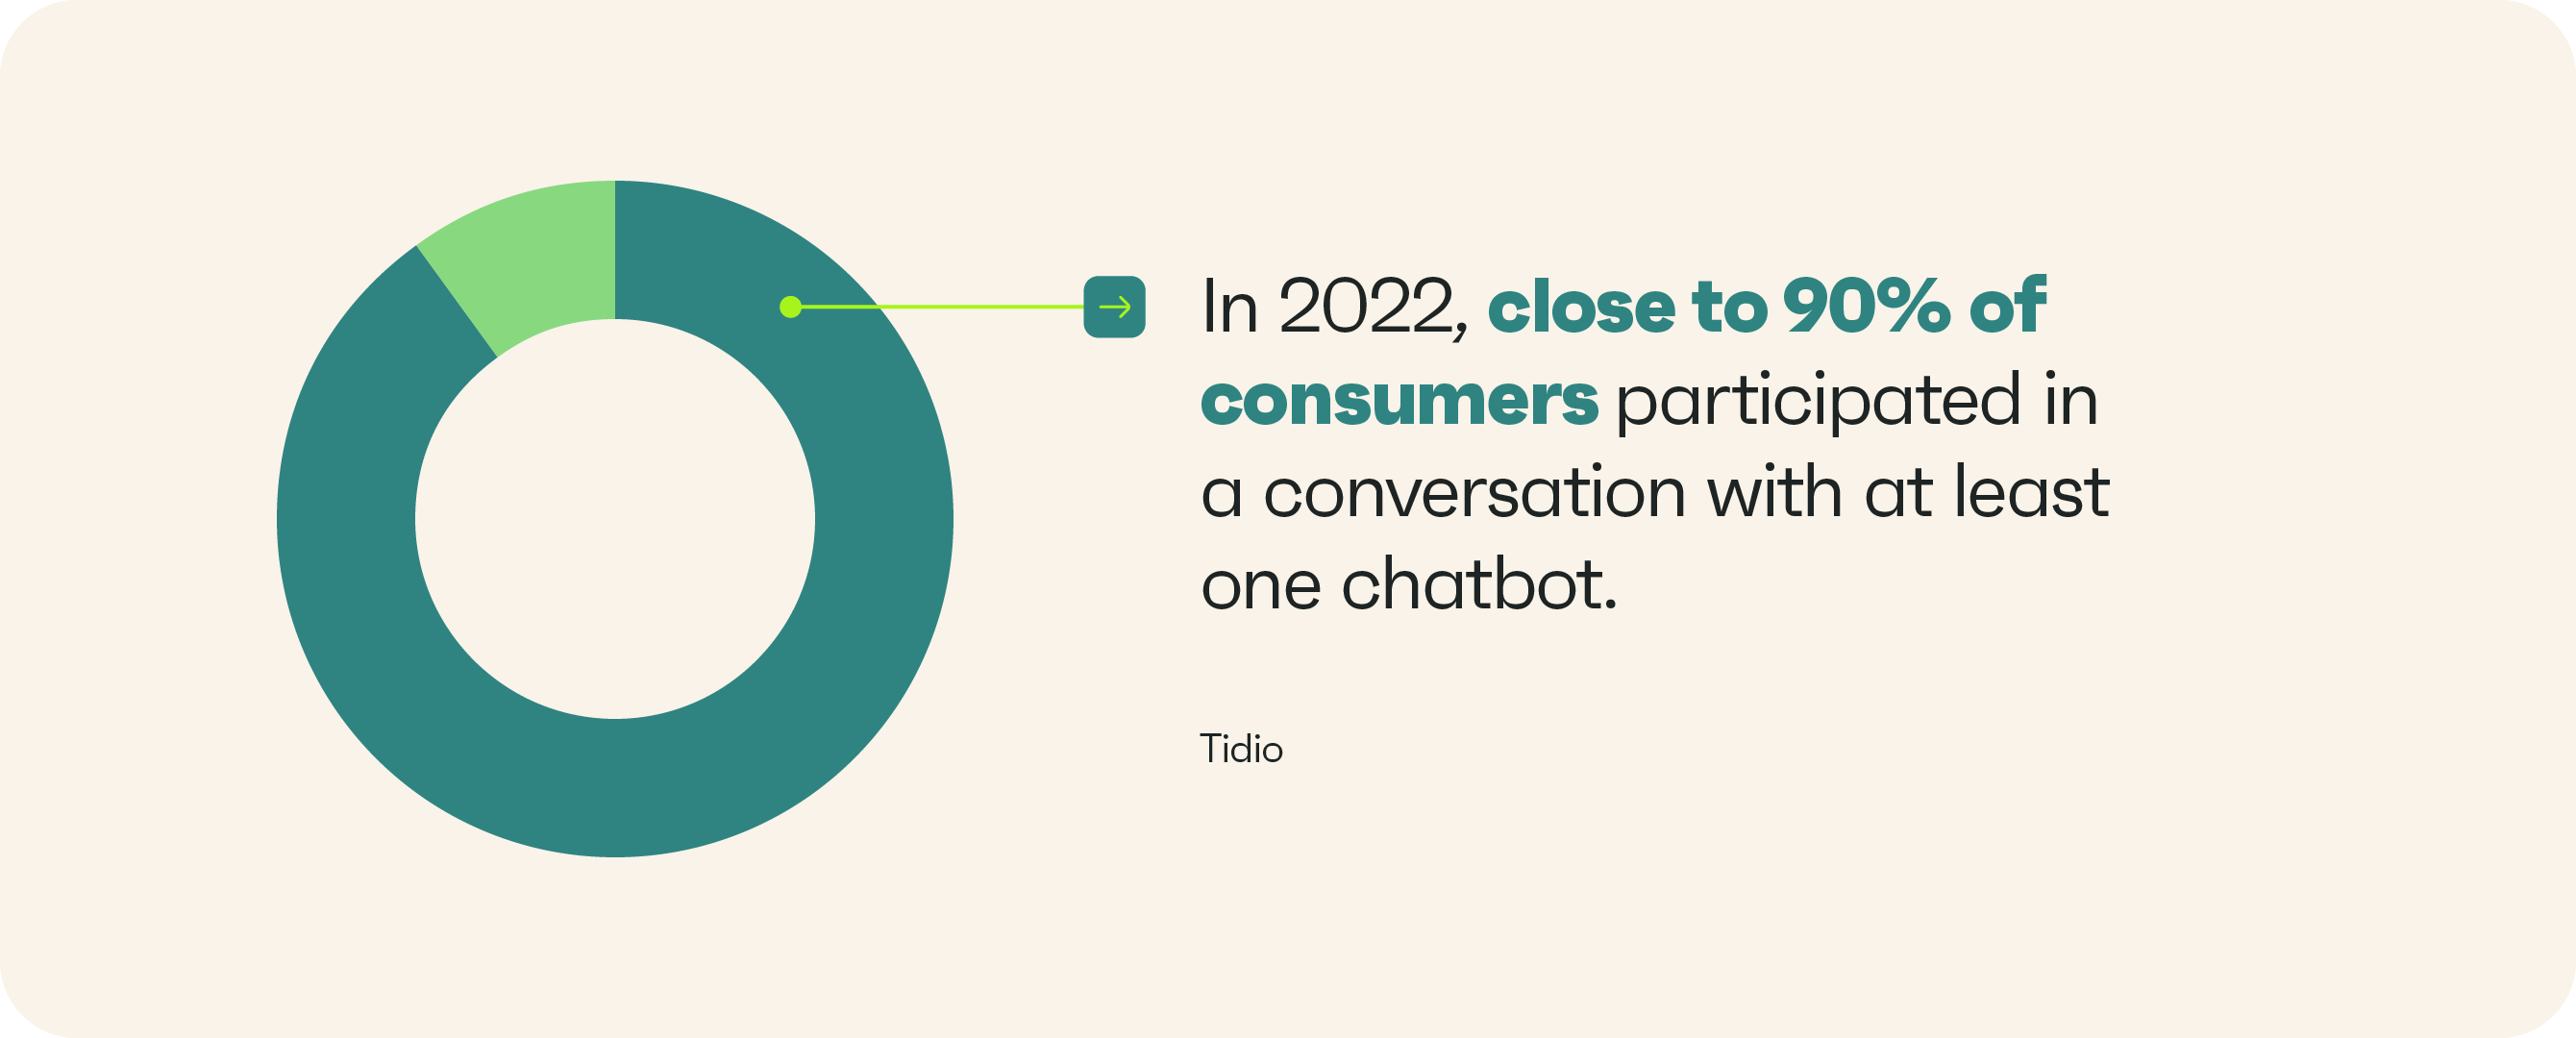 In 2022, close to 90% of consumers participated in a conversation with at least one chatbot